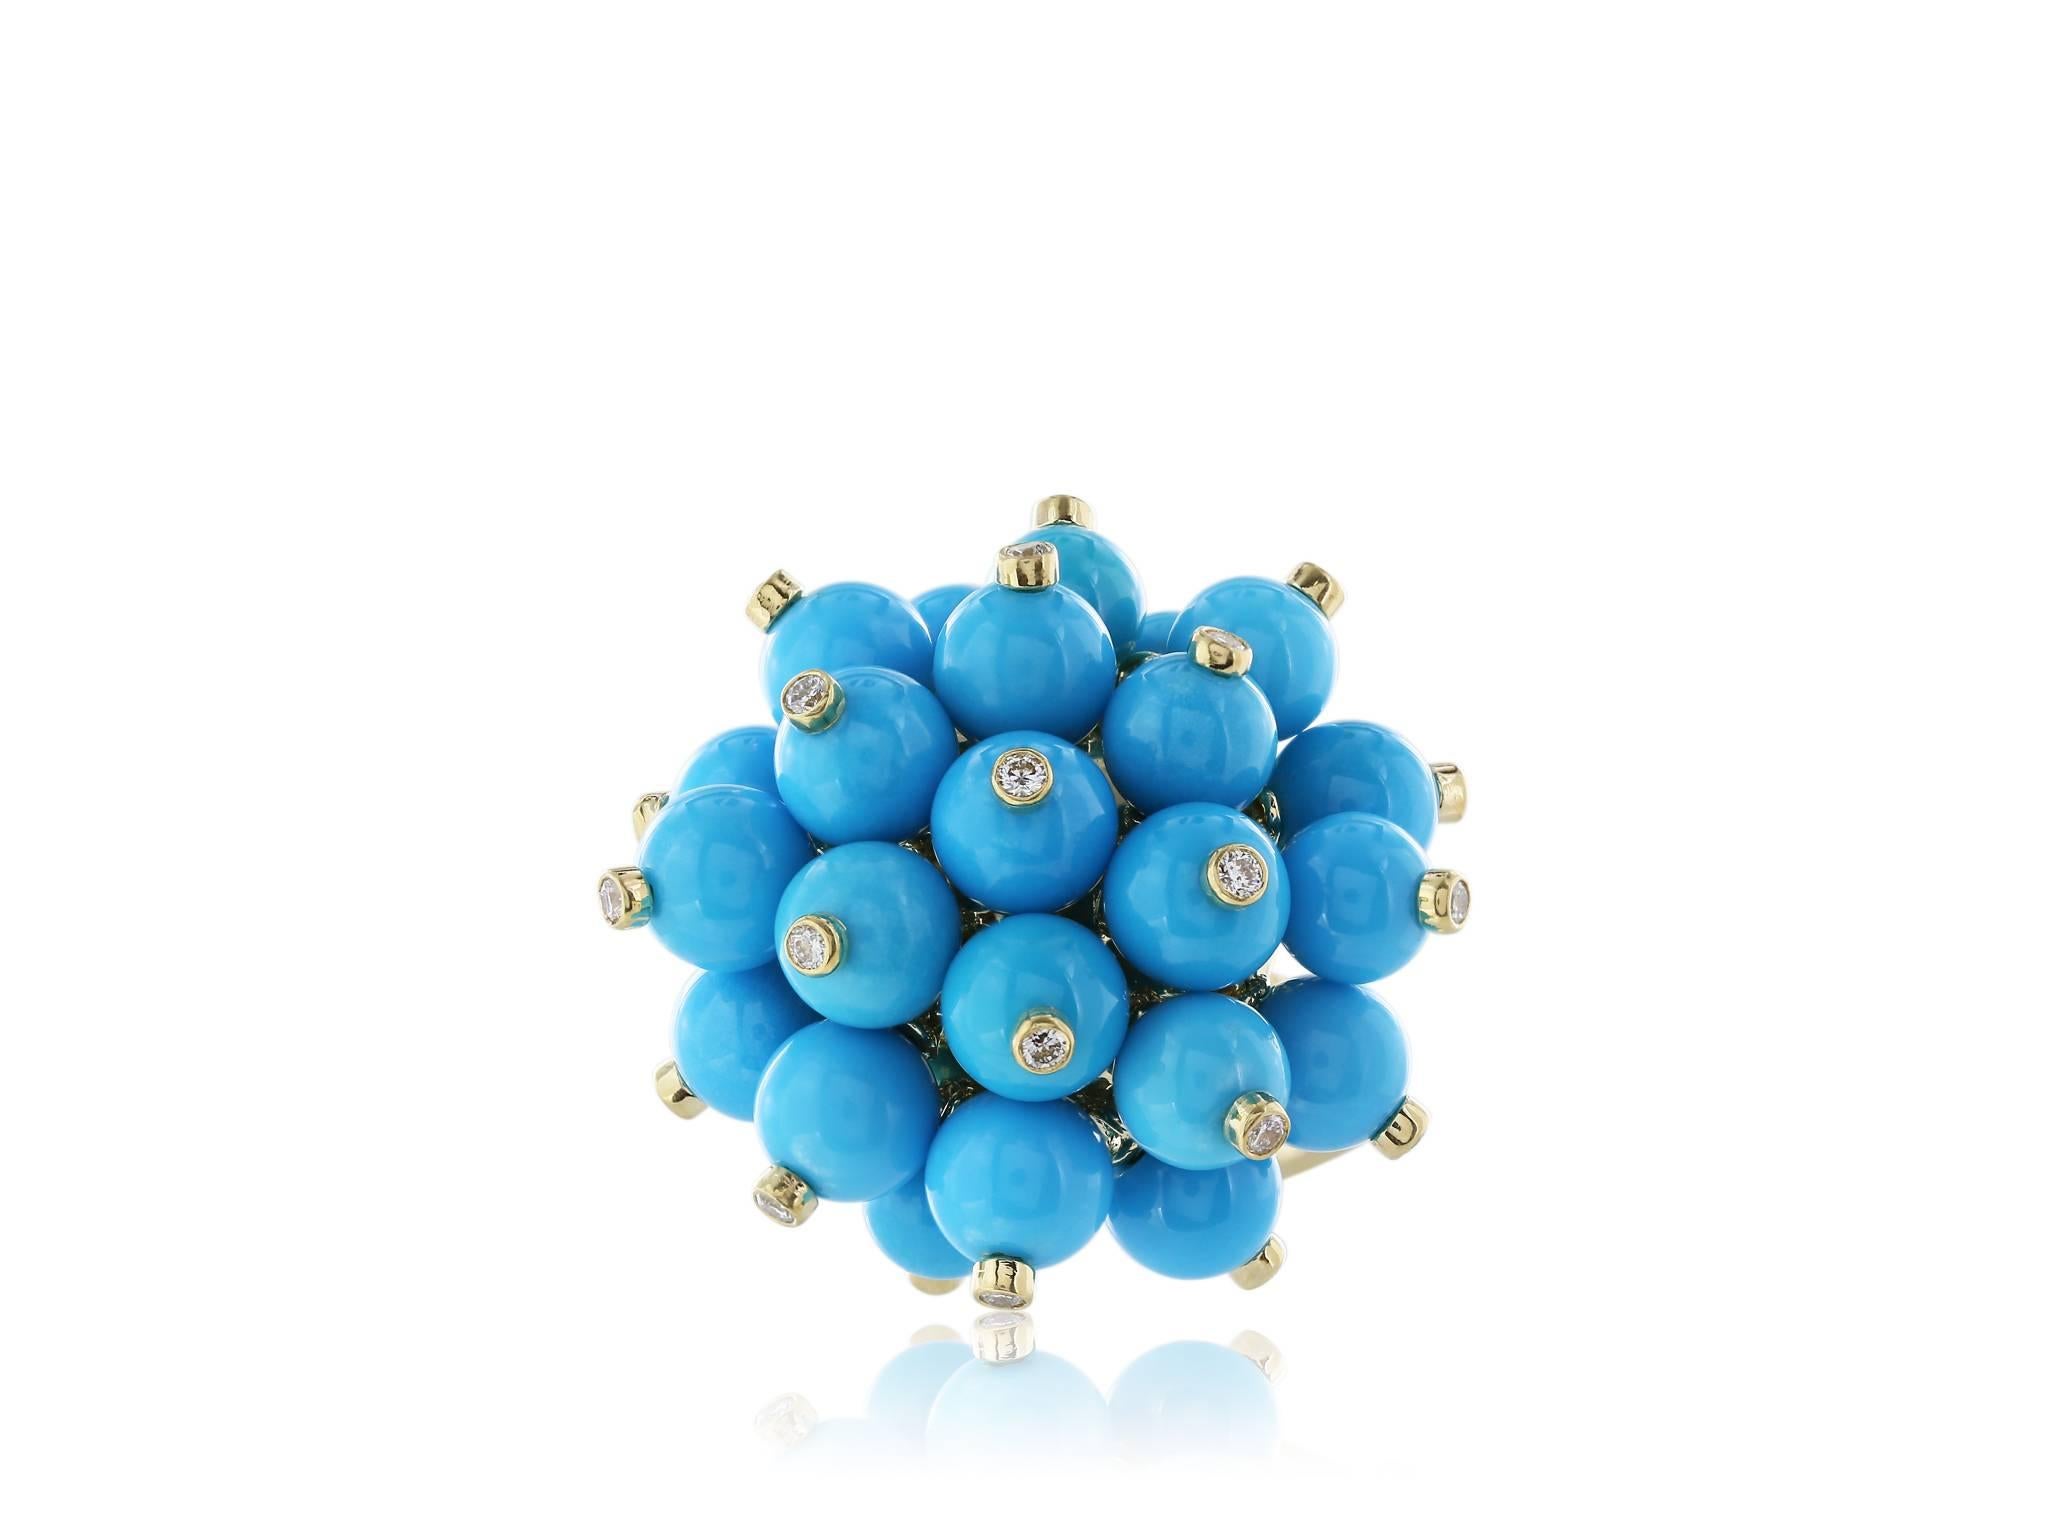 18 karat yellow gold pom pom ring, consisting of 6mm turquoise beads with a bezel set diamond on each bead, diamonds have a total weight of 0.46 carats. Ring by Aletto Brothers.